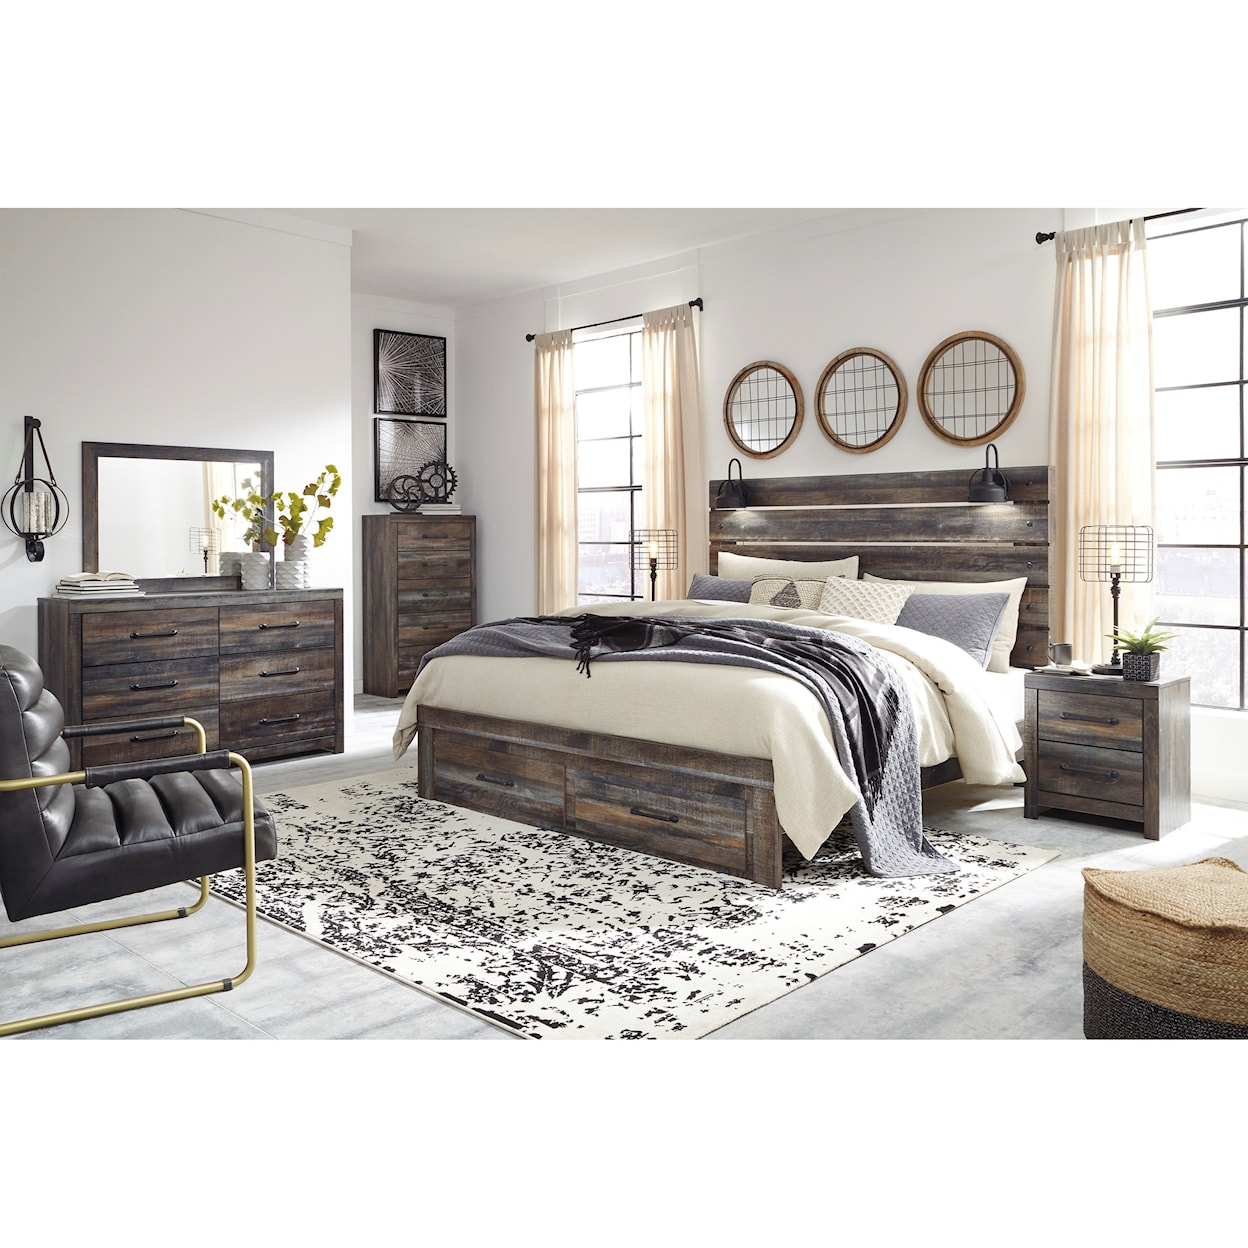 Signature Design by Ashley Drystan 7PC King Bedroom Group